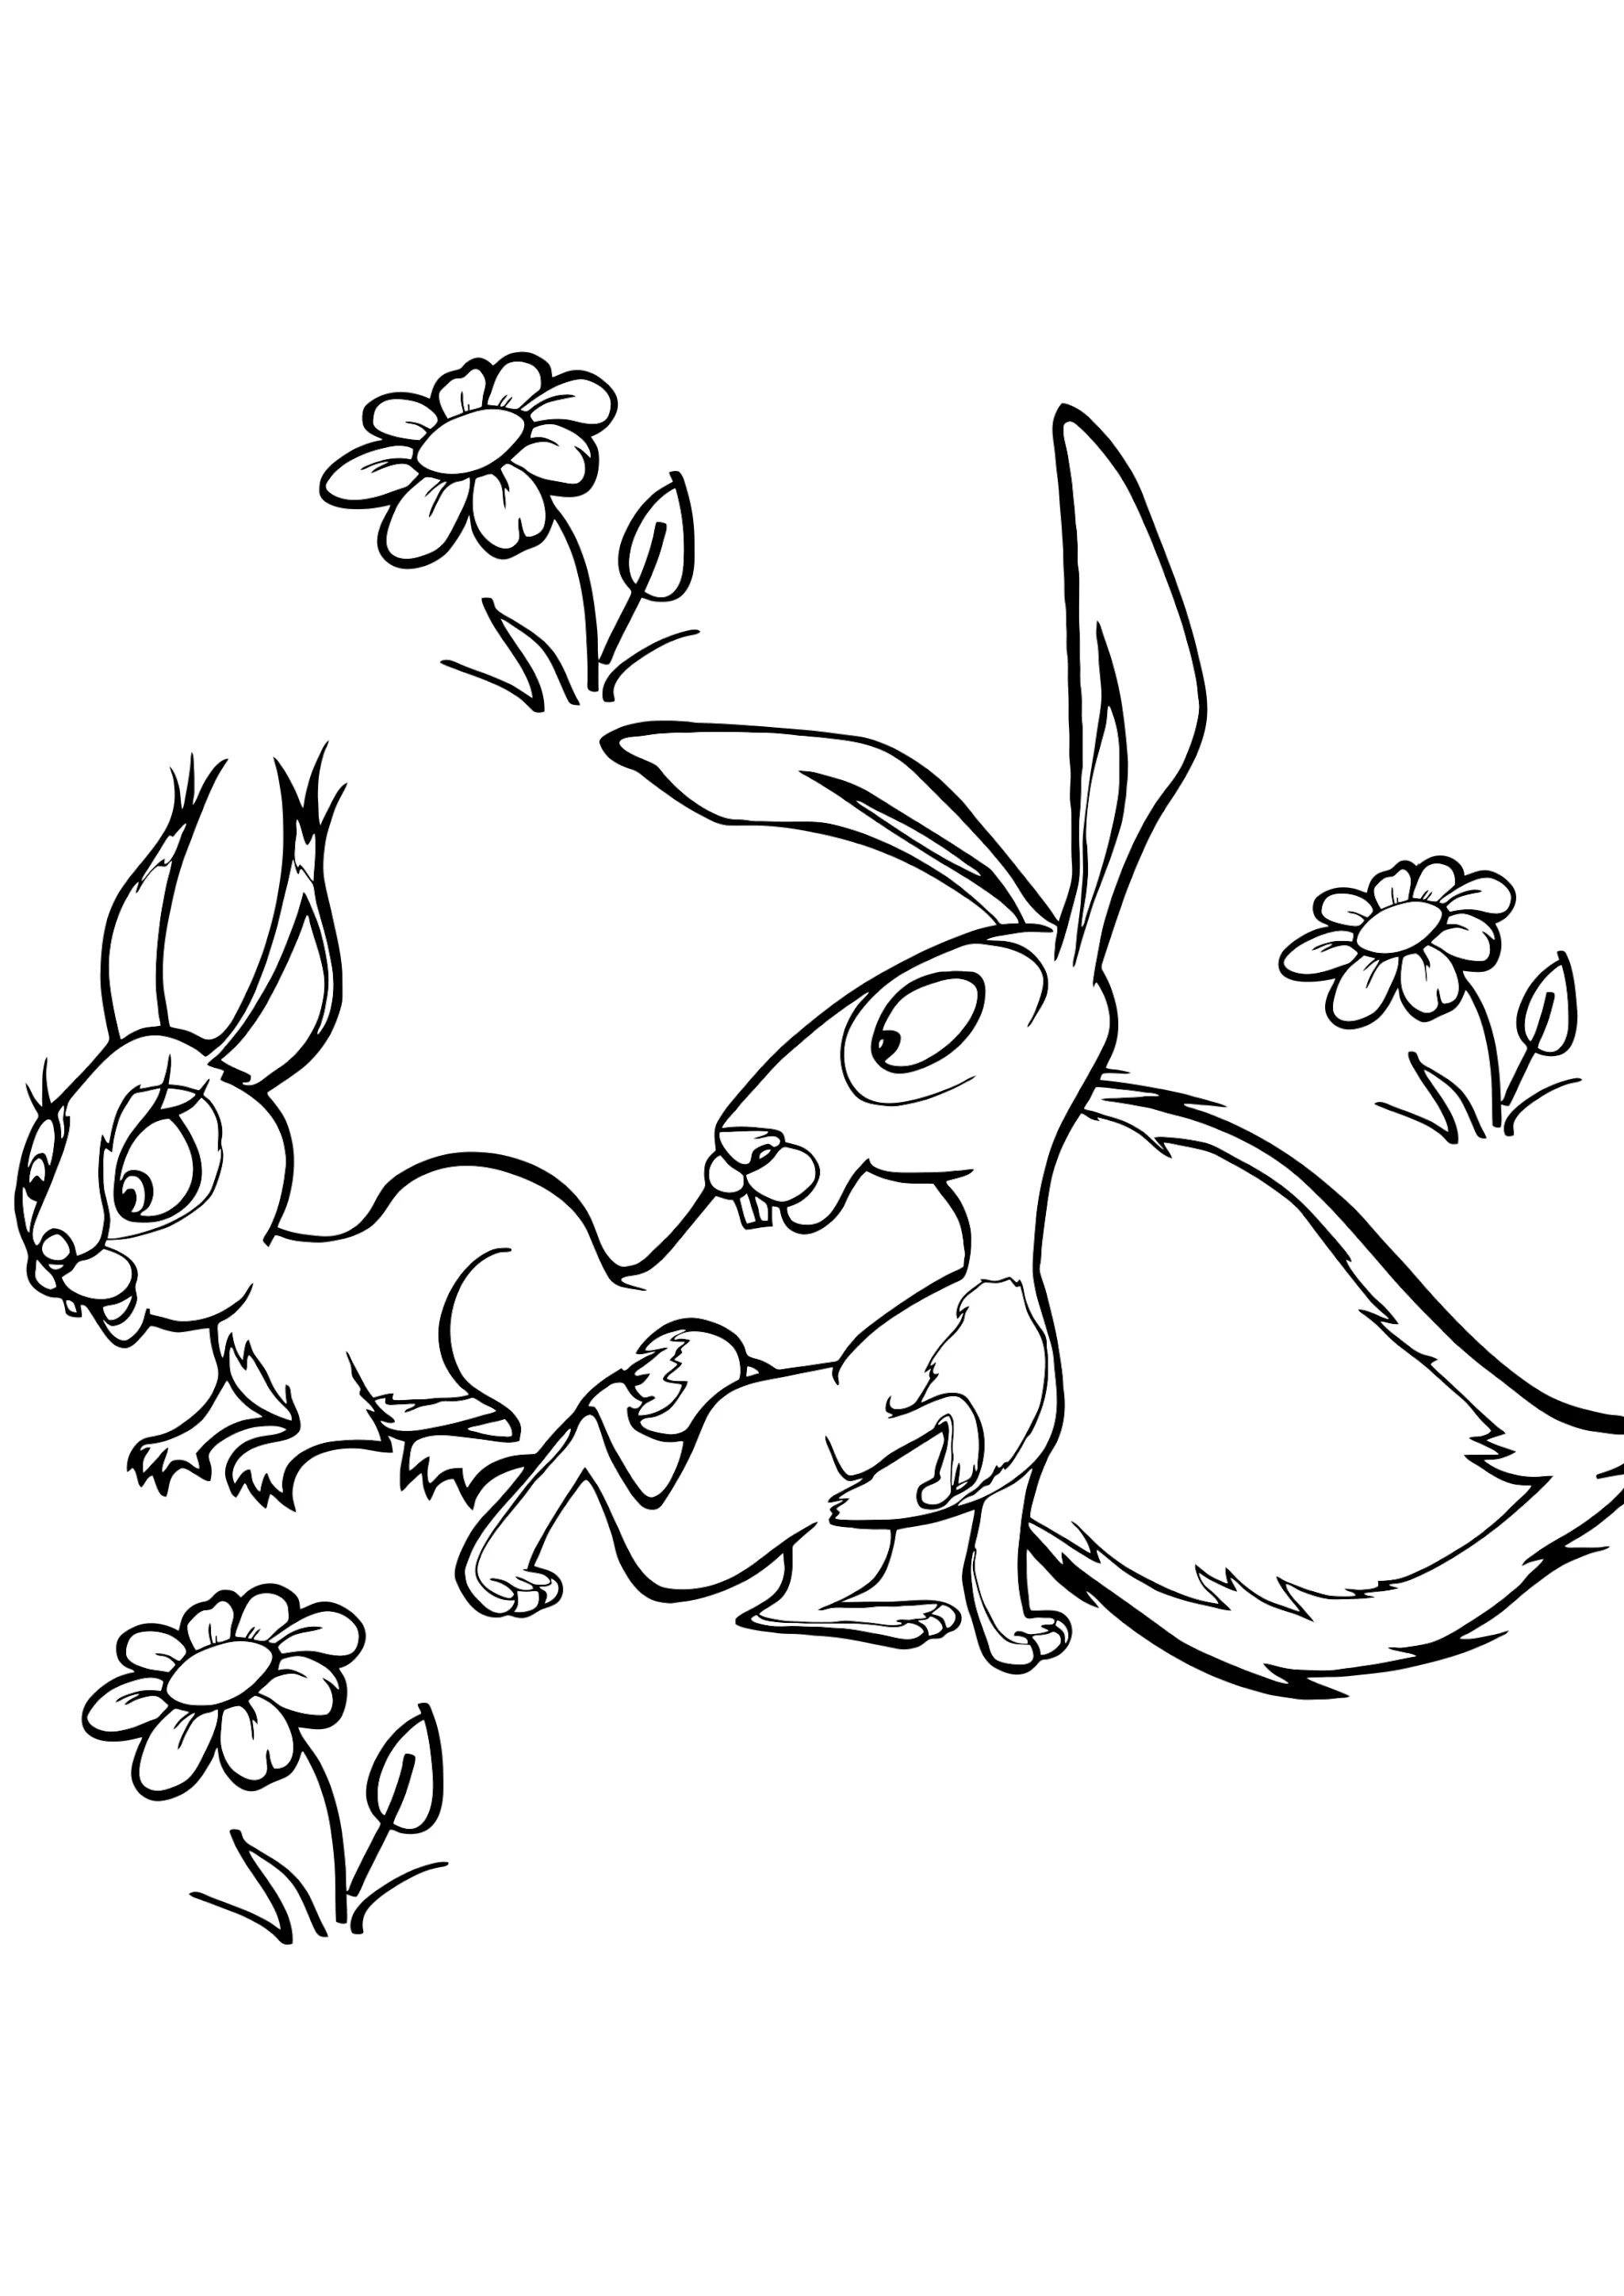 Unforgettable coloring hare and squirrel